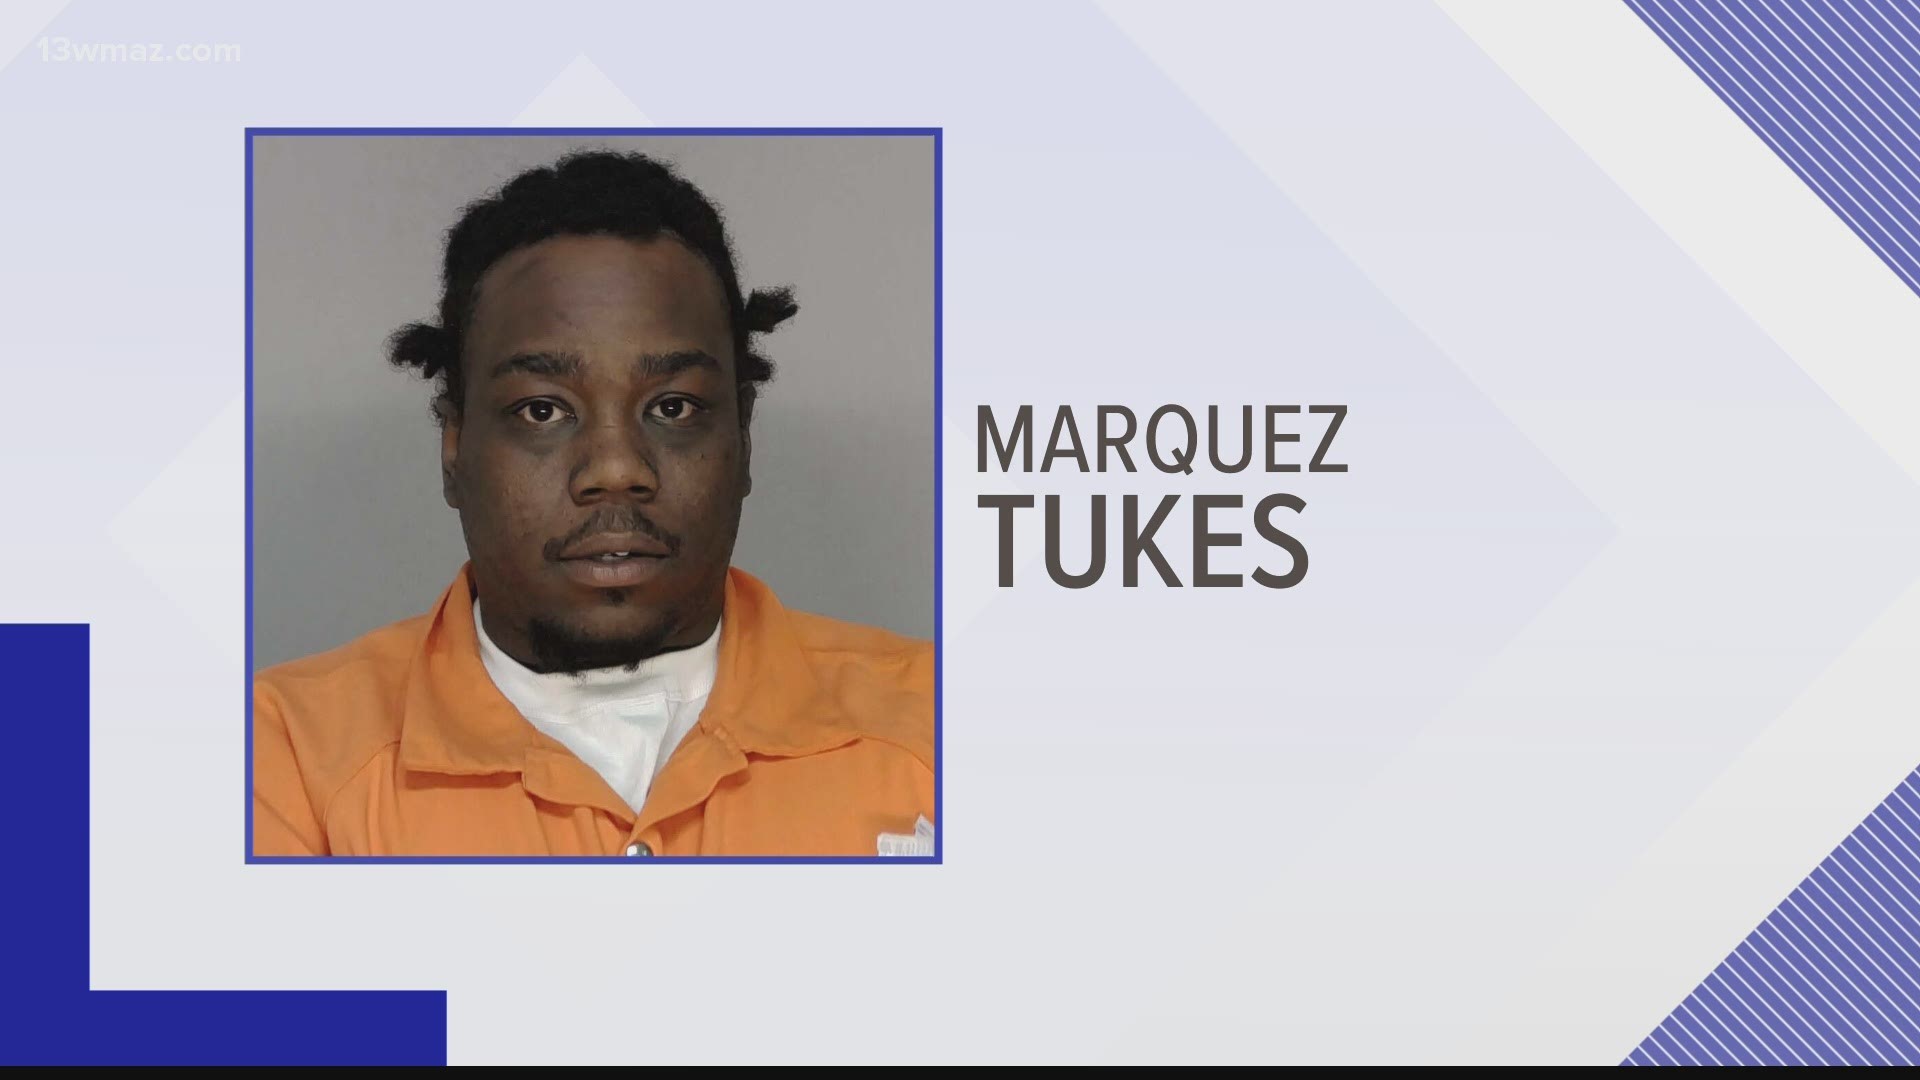 31-year-old Marquez Dontae Tukes is charged with 3 counts Sexual Assault, 2 counts Aggravated Assault, 2 counts of False Imprisonment, Armed Robbery and kidnapping